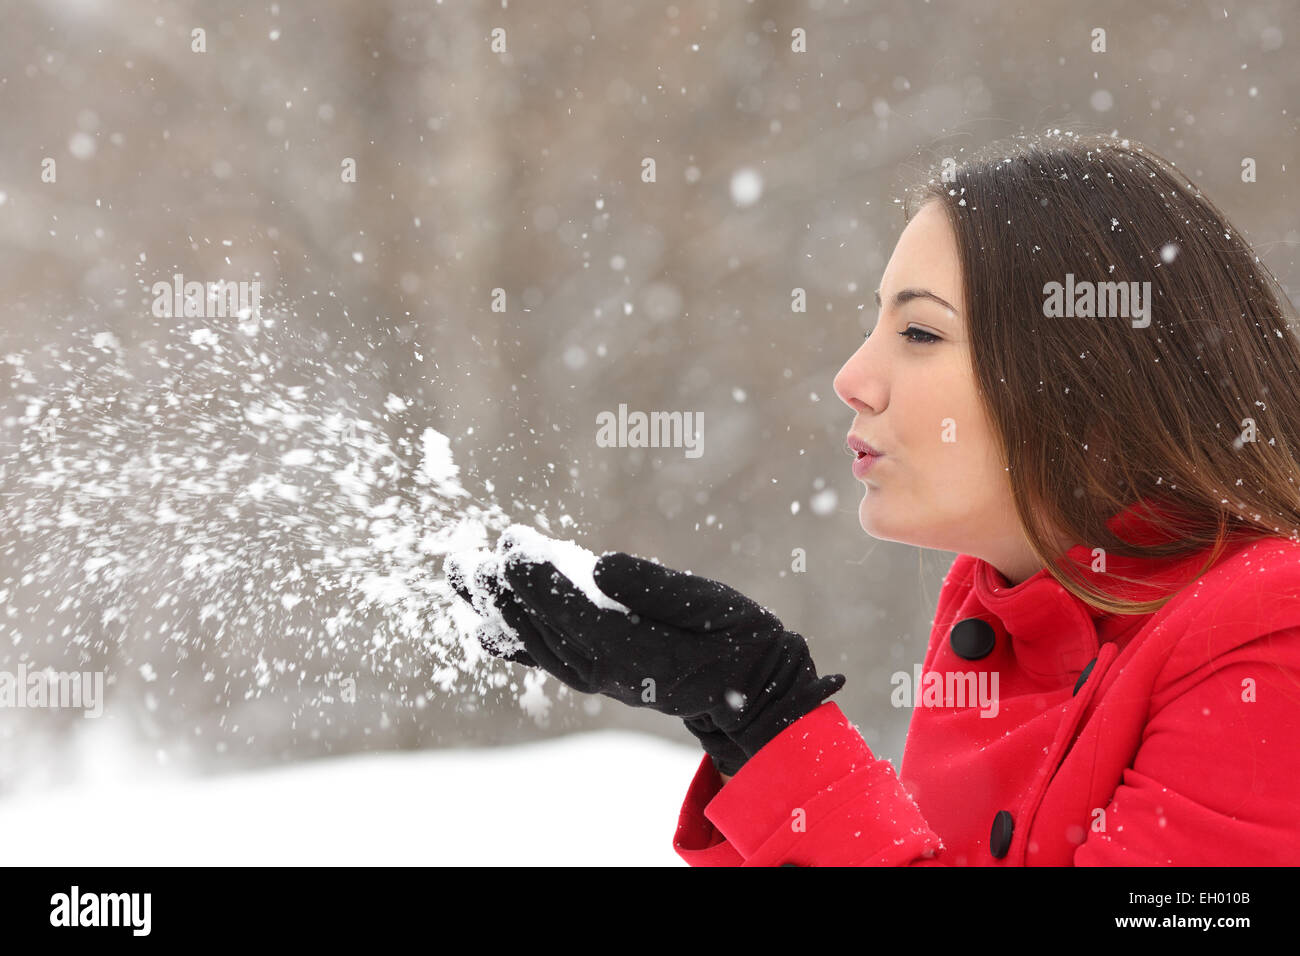 Side view of a candid woman in red blowing snow in winter during a snowfall Stock Photo